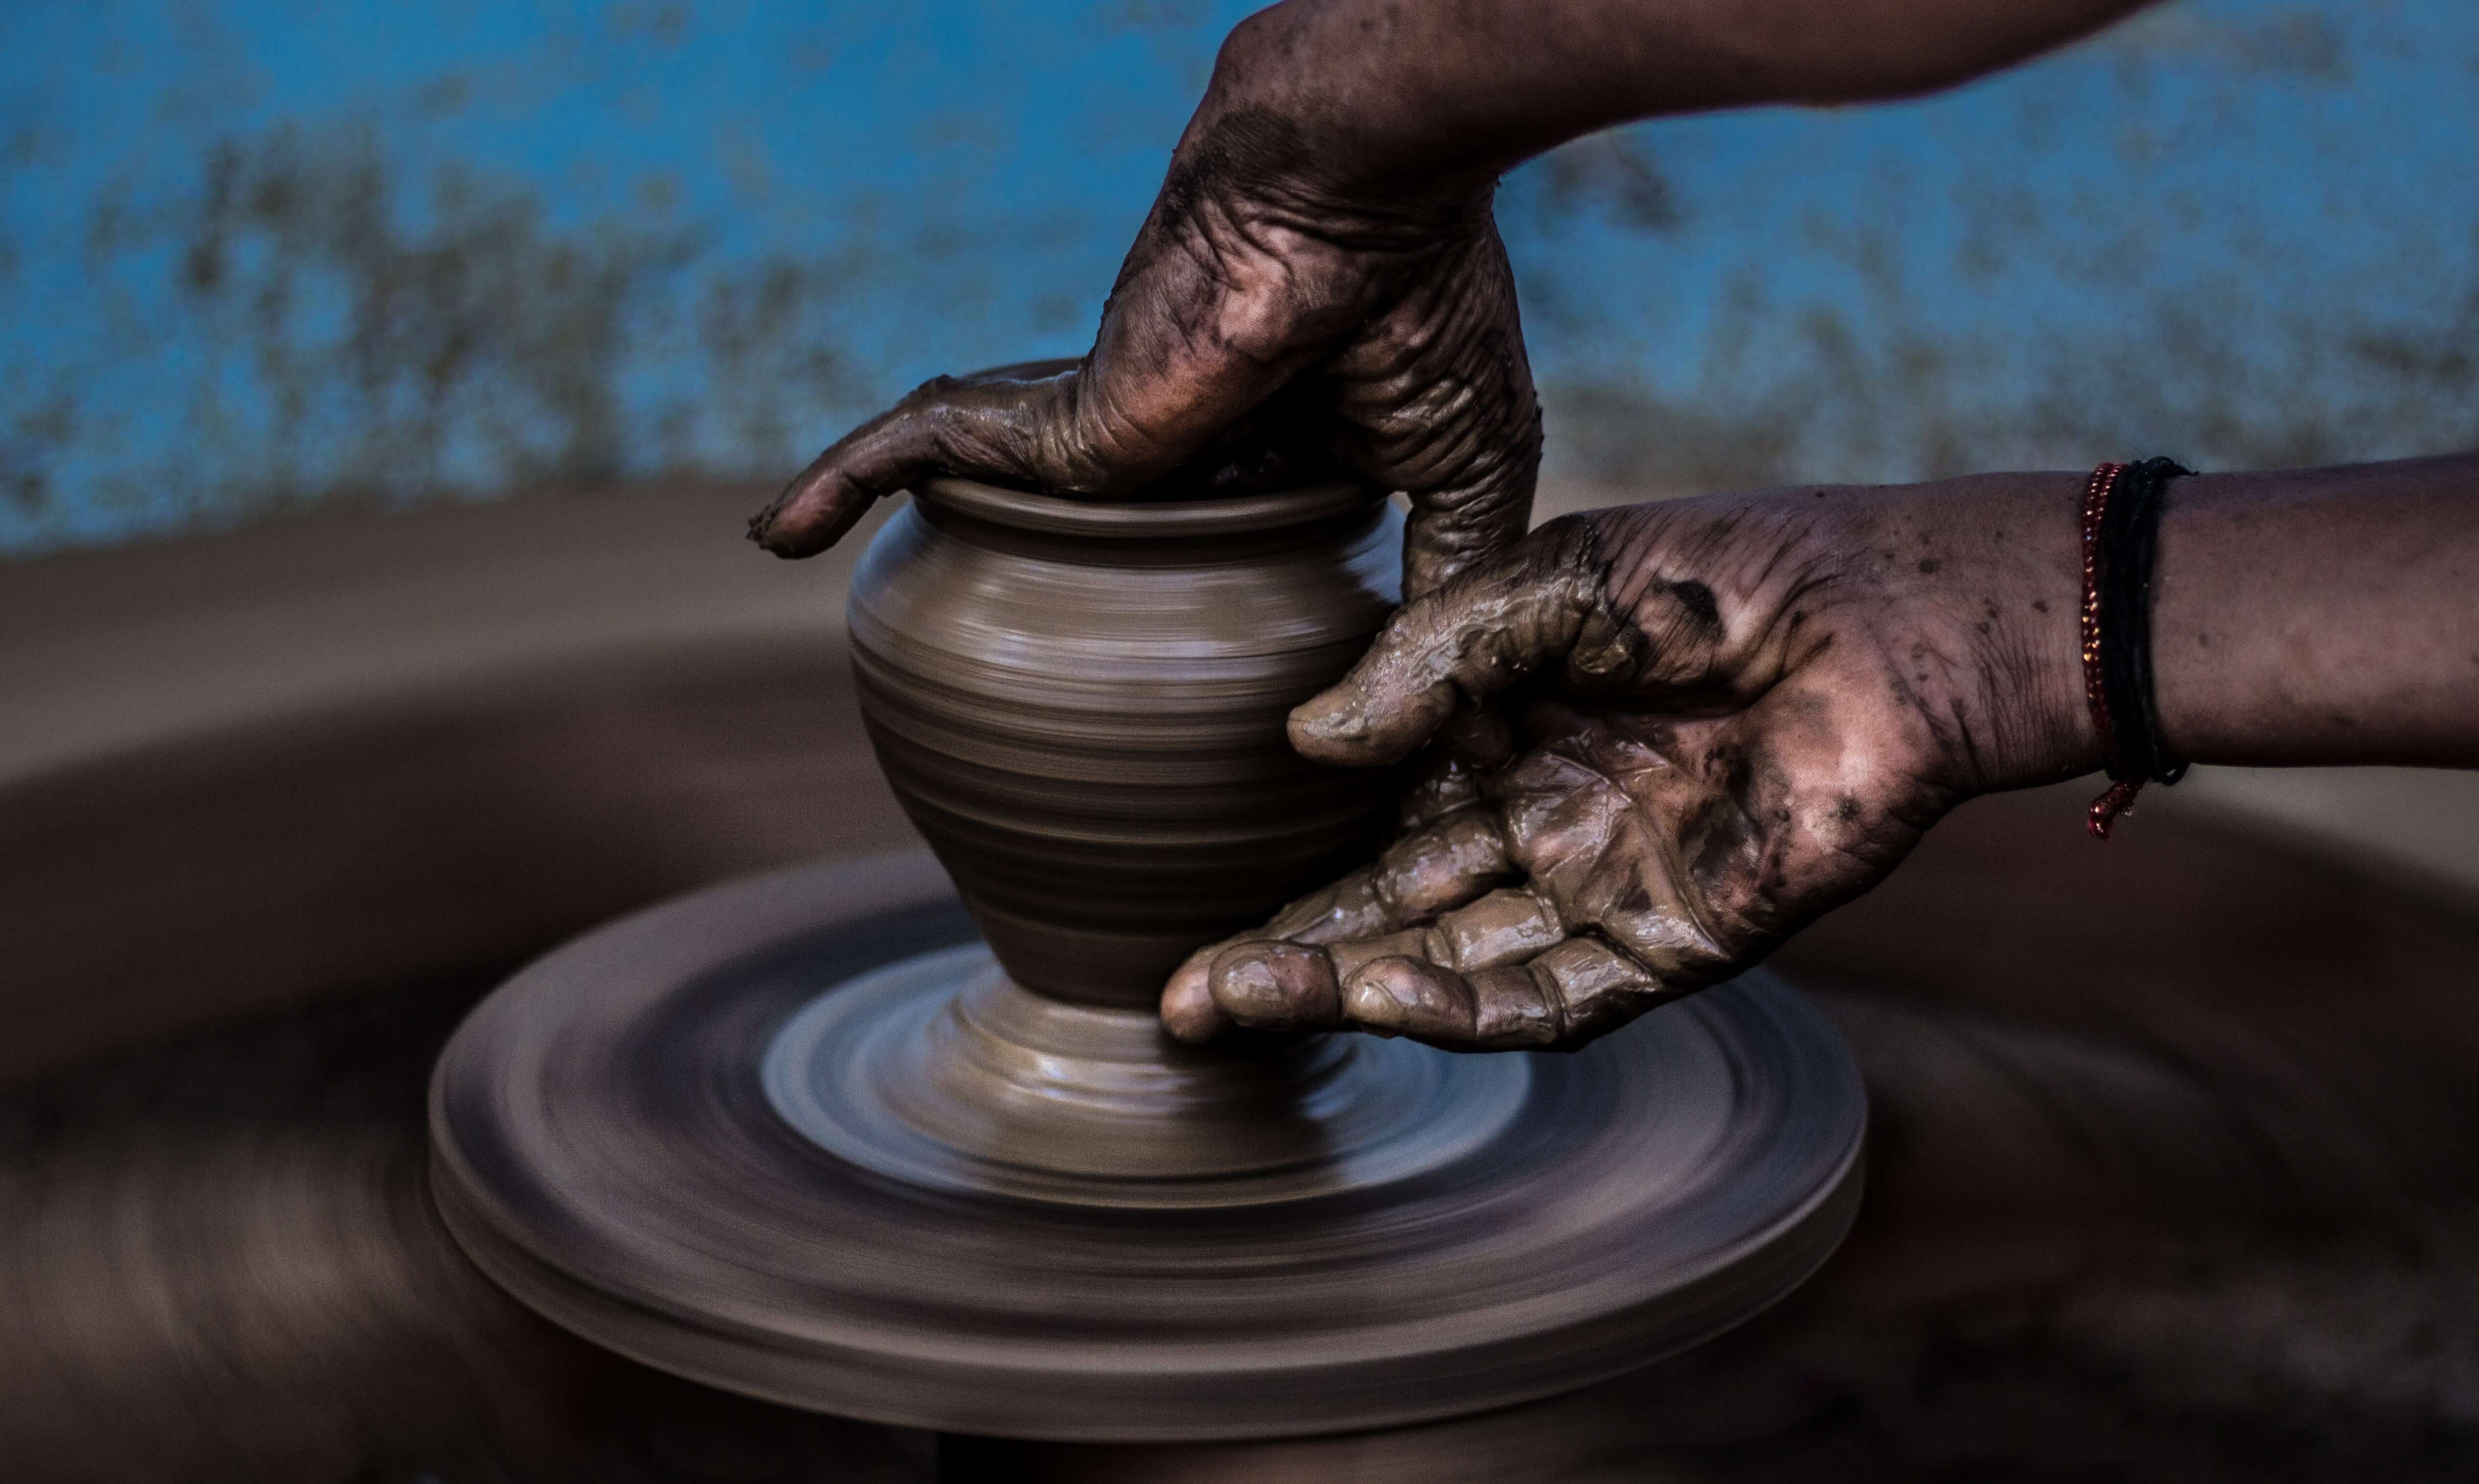 A pair of hands shape a vase on a pottery wheel